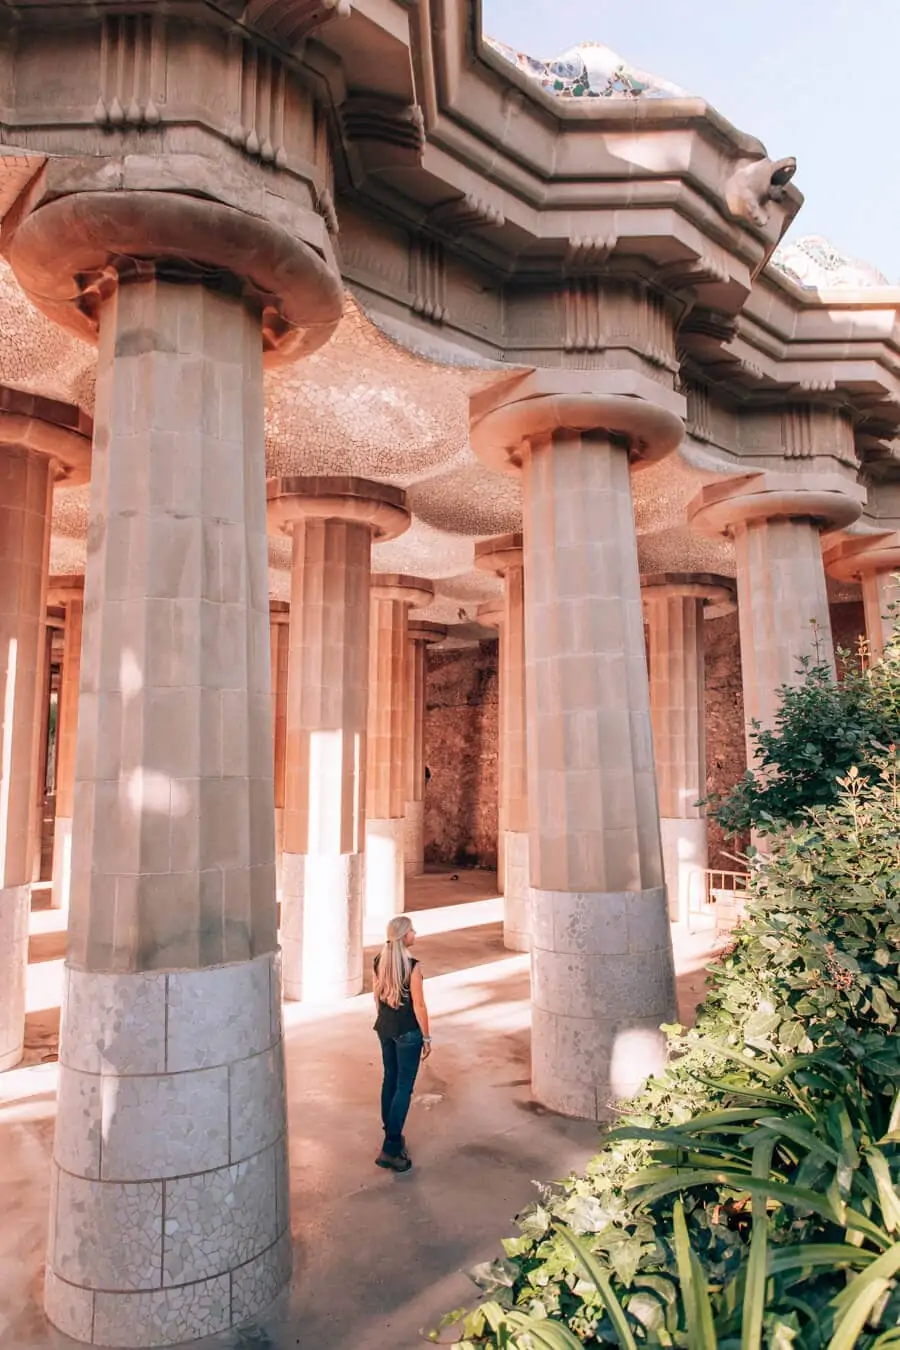 A woman standing in the Hypostyle Room in Park Guell surrounded by columns